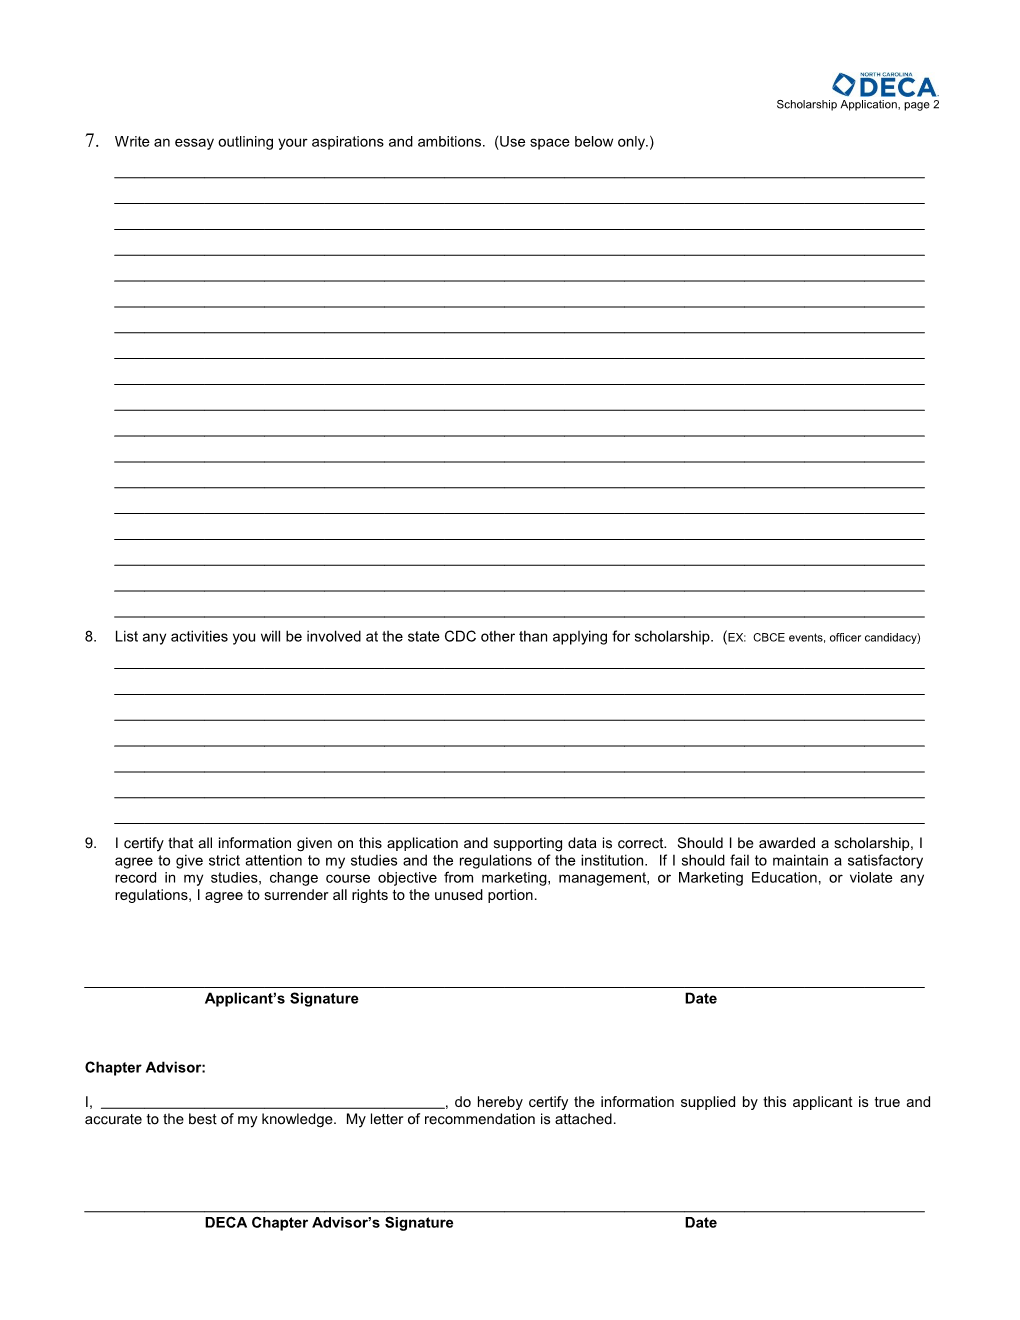 Type Application (Four Pages) and Complete the Following